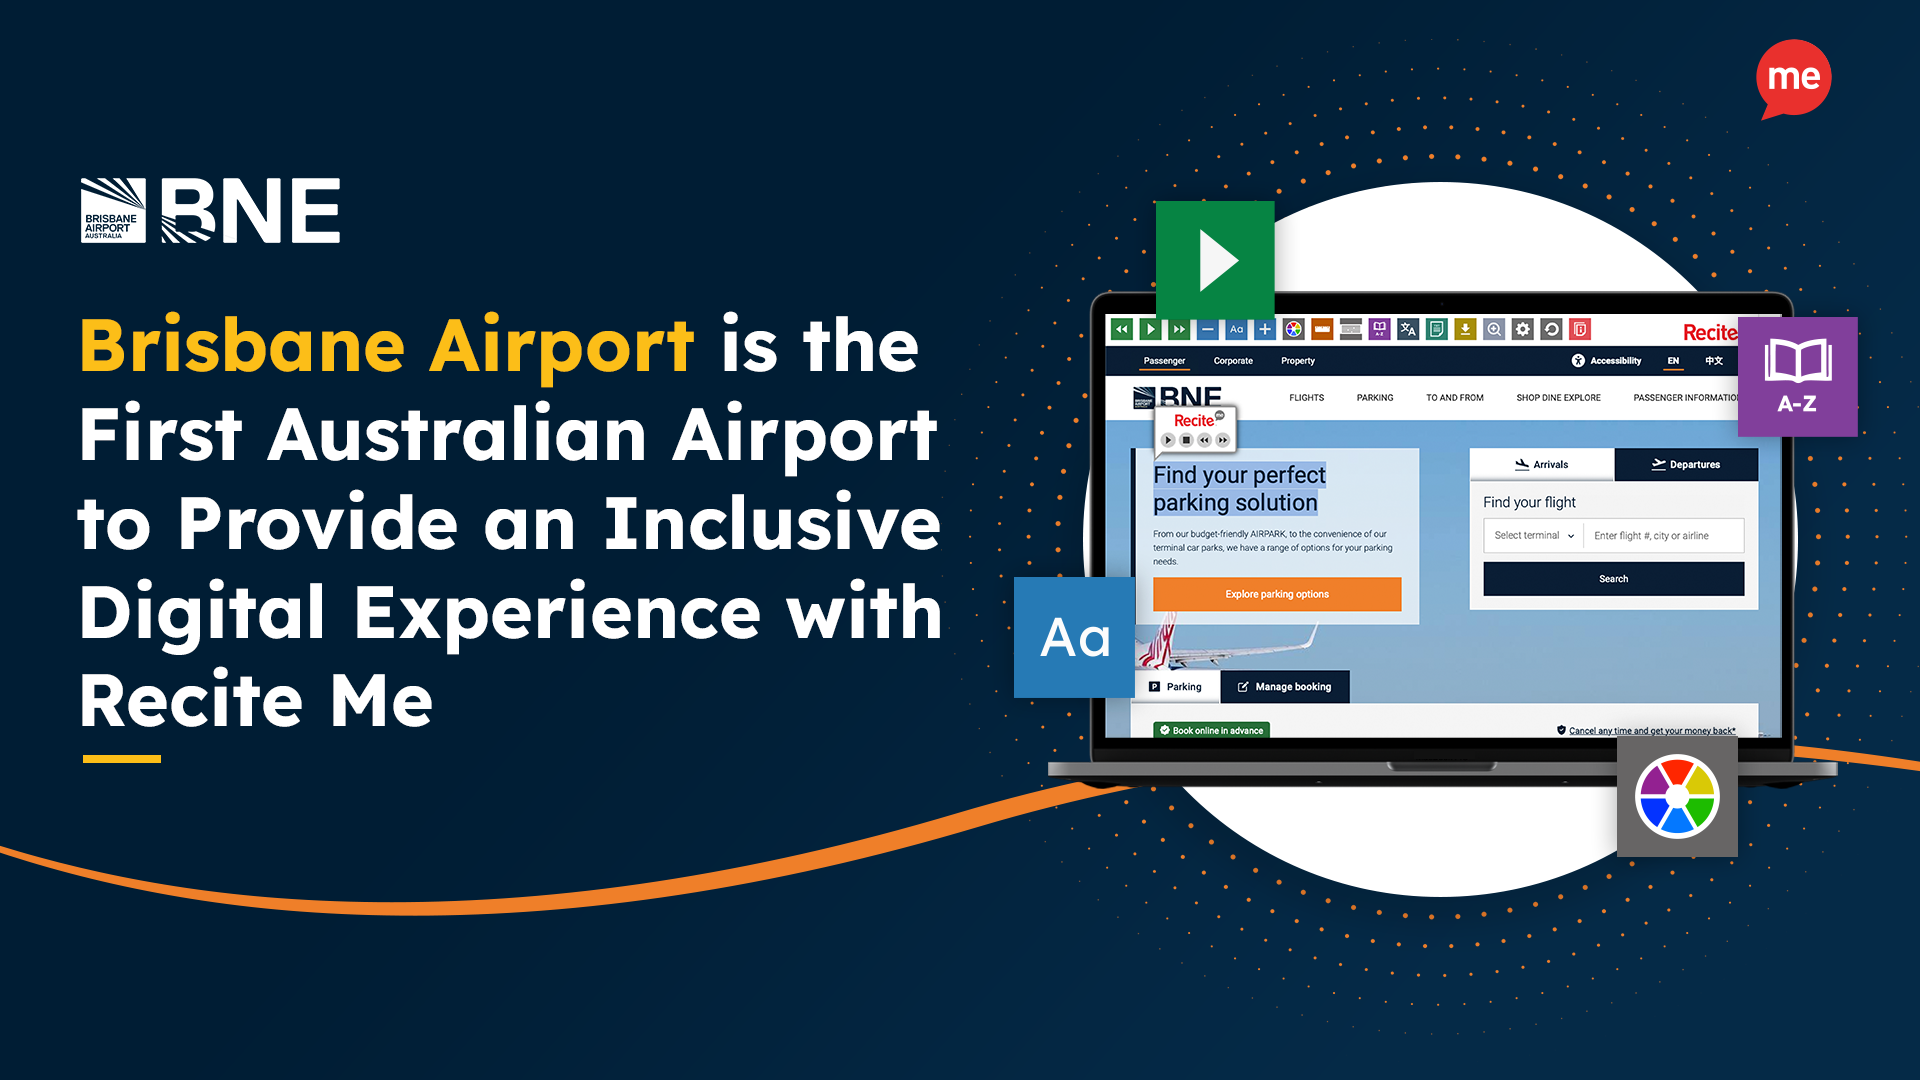 Brisbane Airport is the First Australian Airport to Provide an Inclusive Digital Experience with Recite Me